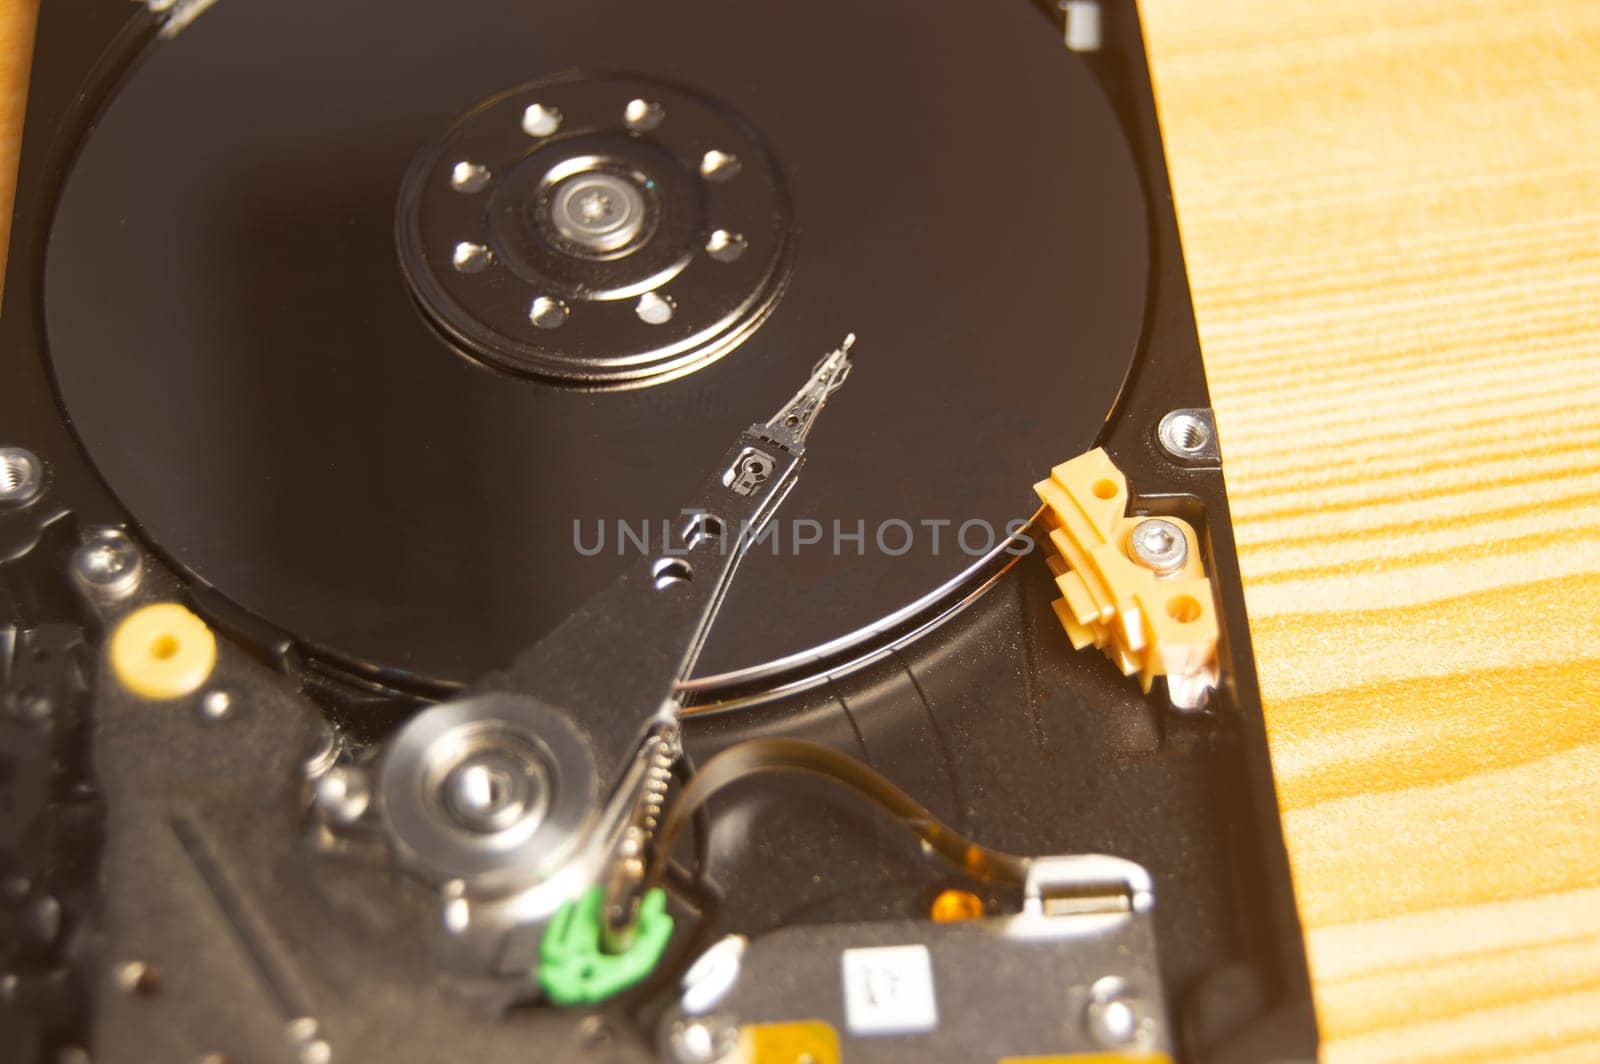 Close-up top view of hard drive